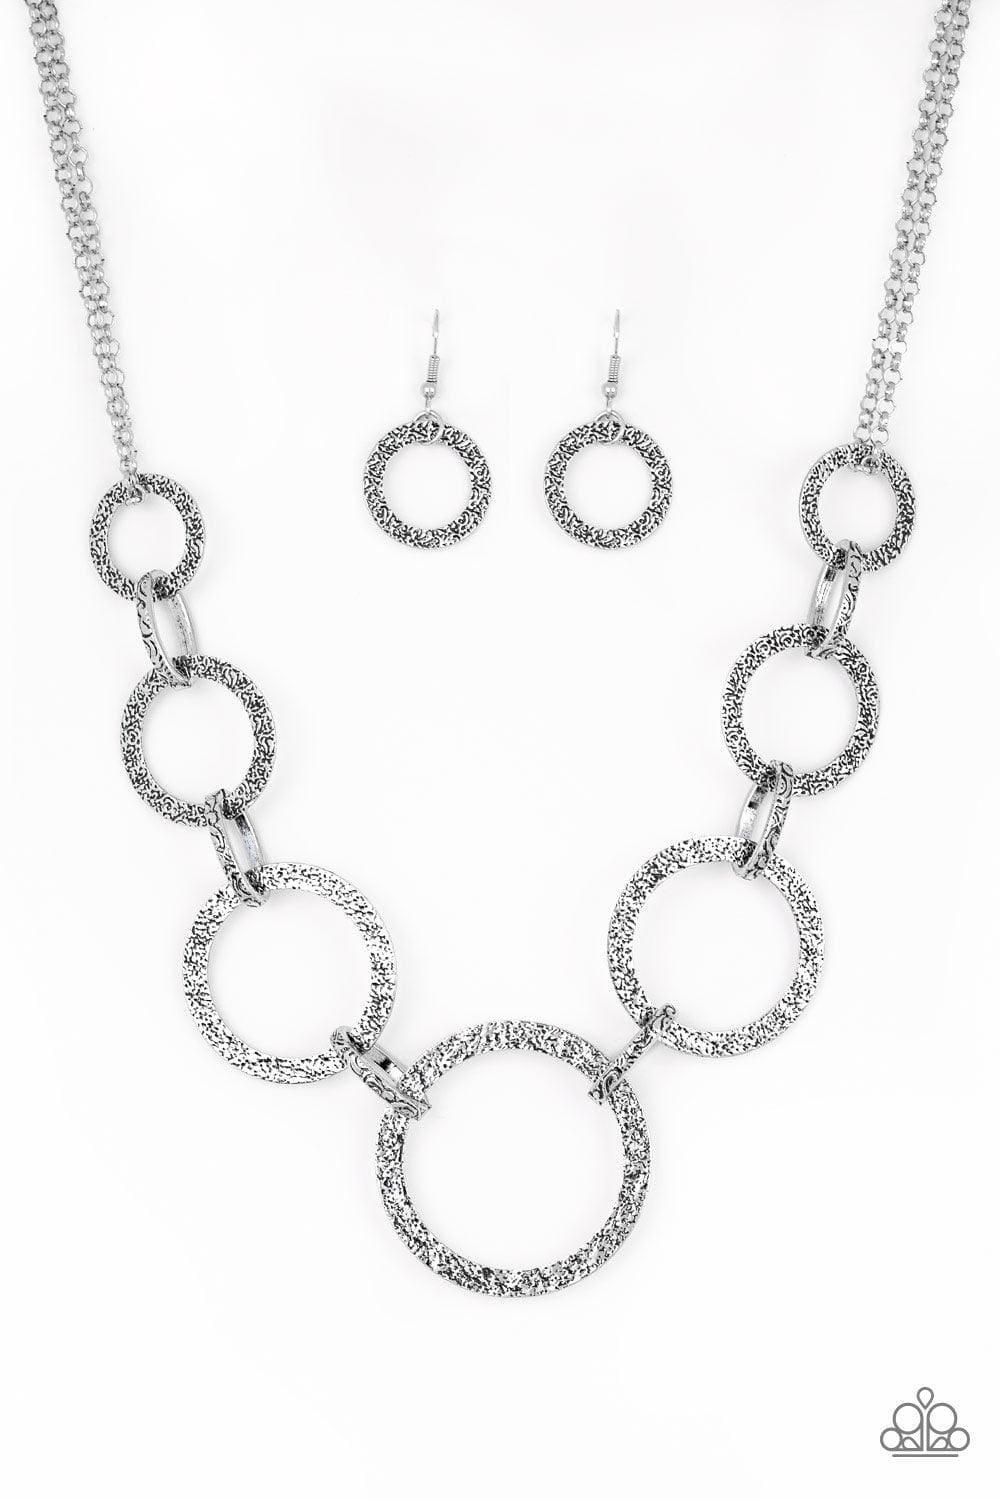 Paparazzi Accessories - City Circus - Silver Necklace - Bling by JessieK